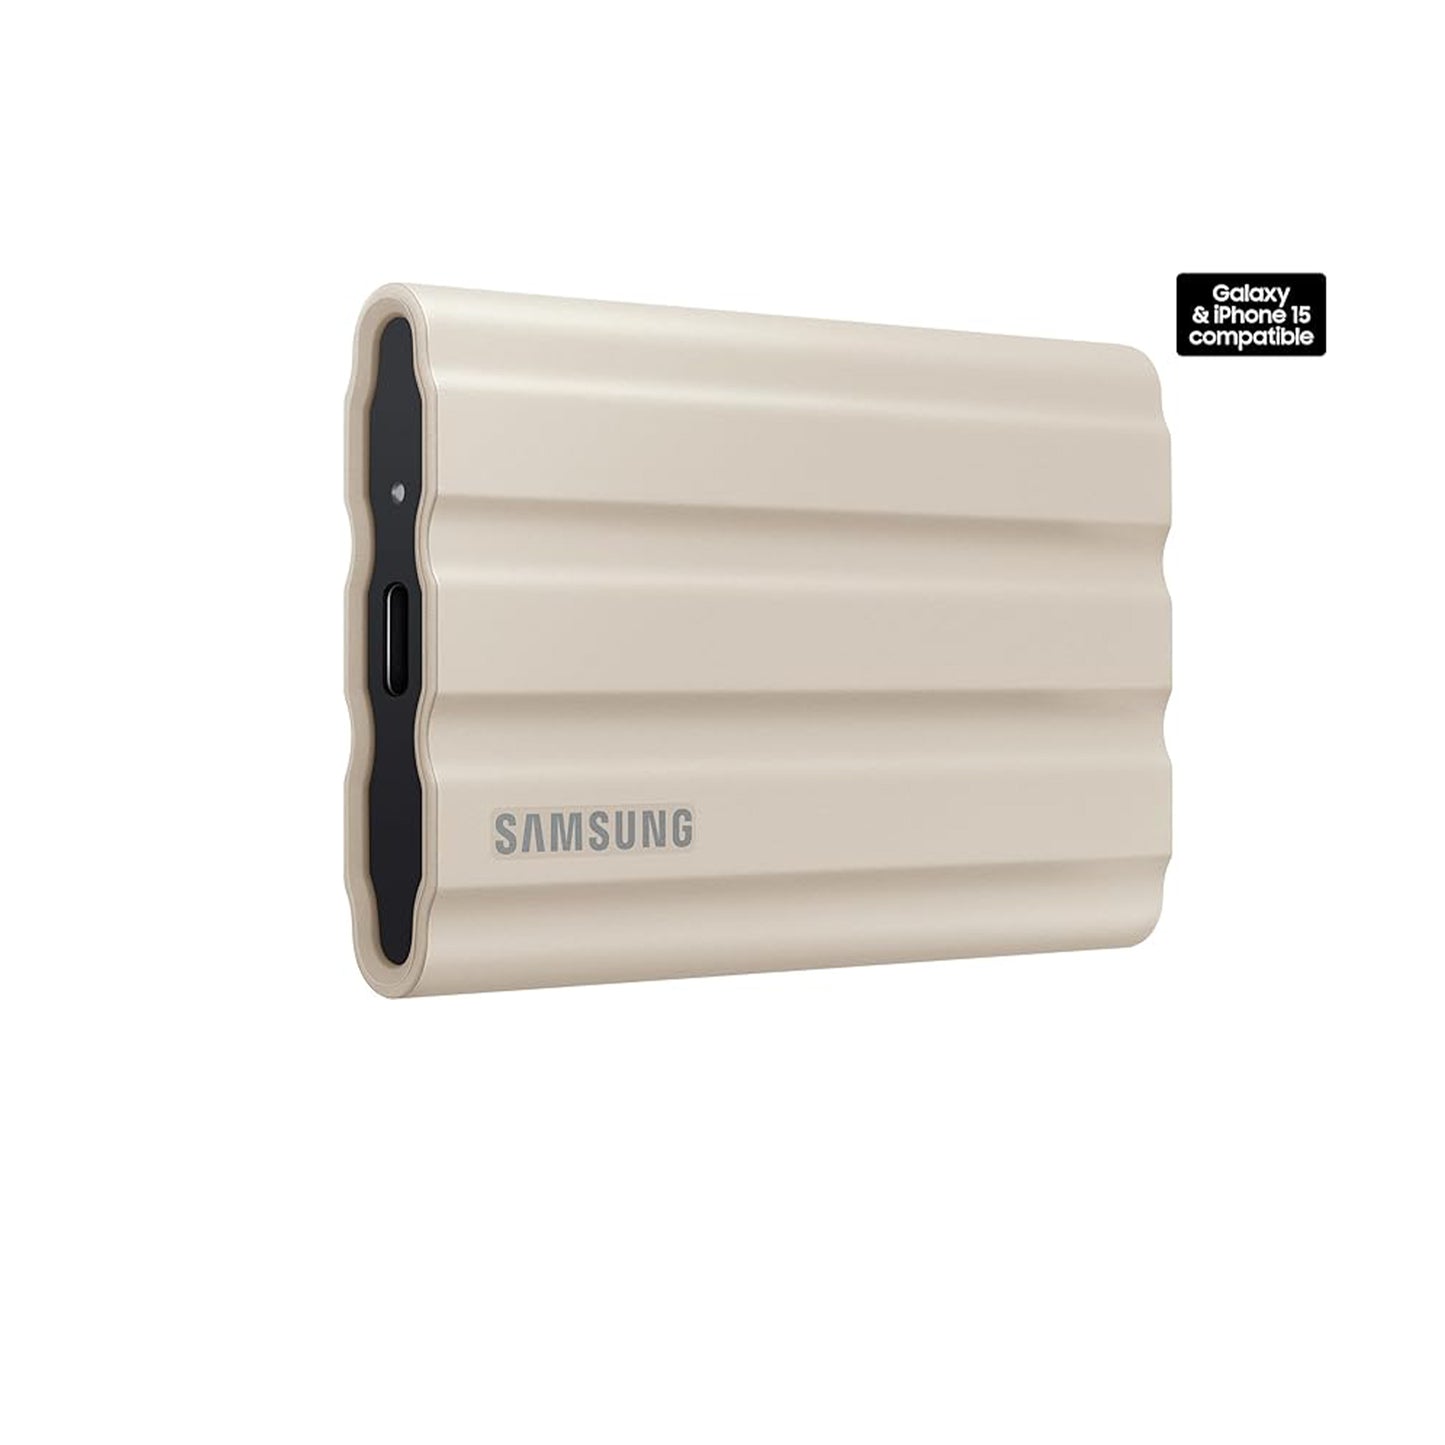 SAMSUNG T7 Shield Portable External Solid State Drive USB 3.2 1TB , IP65 Water Resistant, Compatible with PC / Mac / Android / Gaming Consoles (MUPE1T0K/AM), Beige